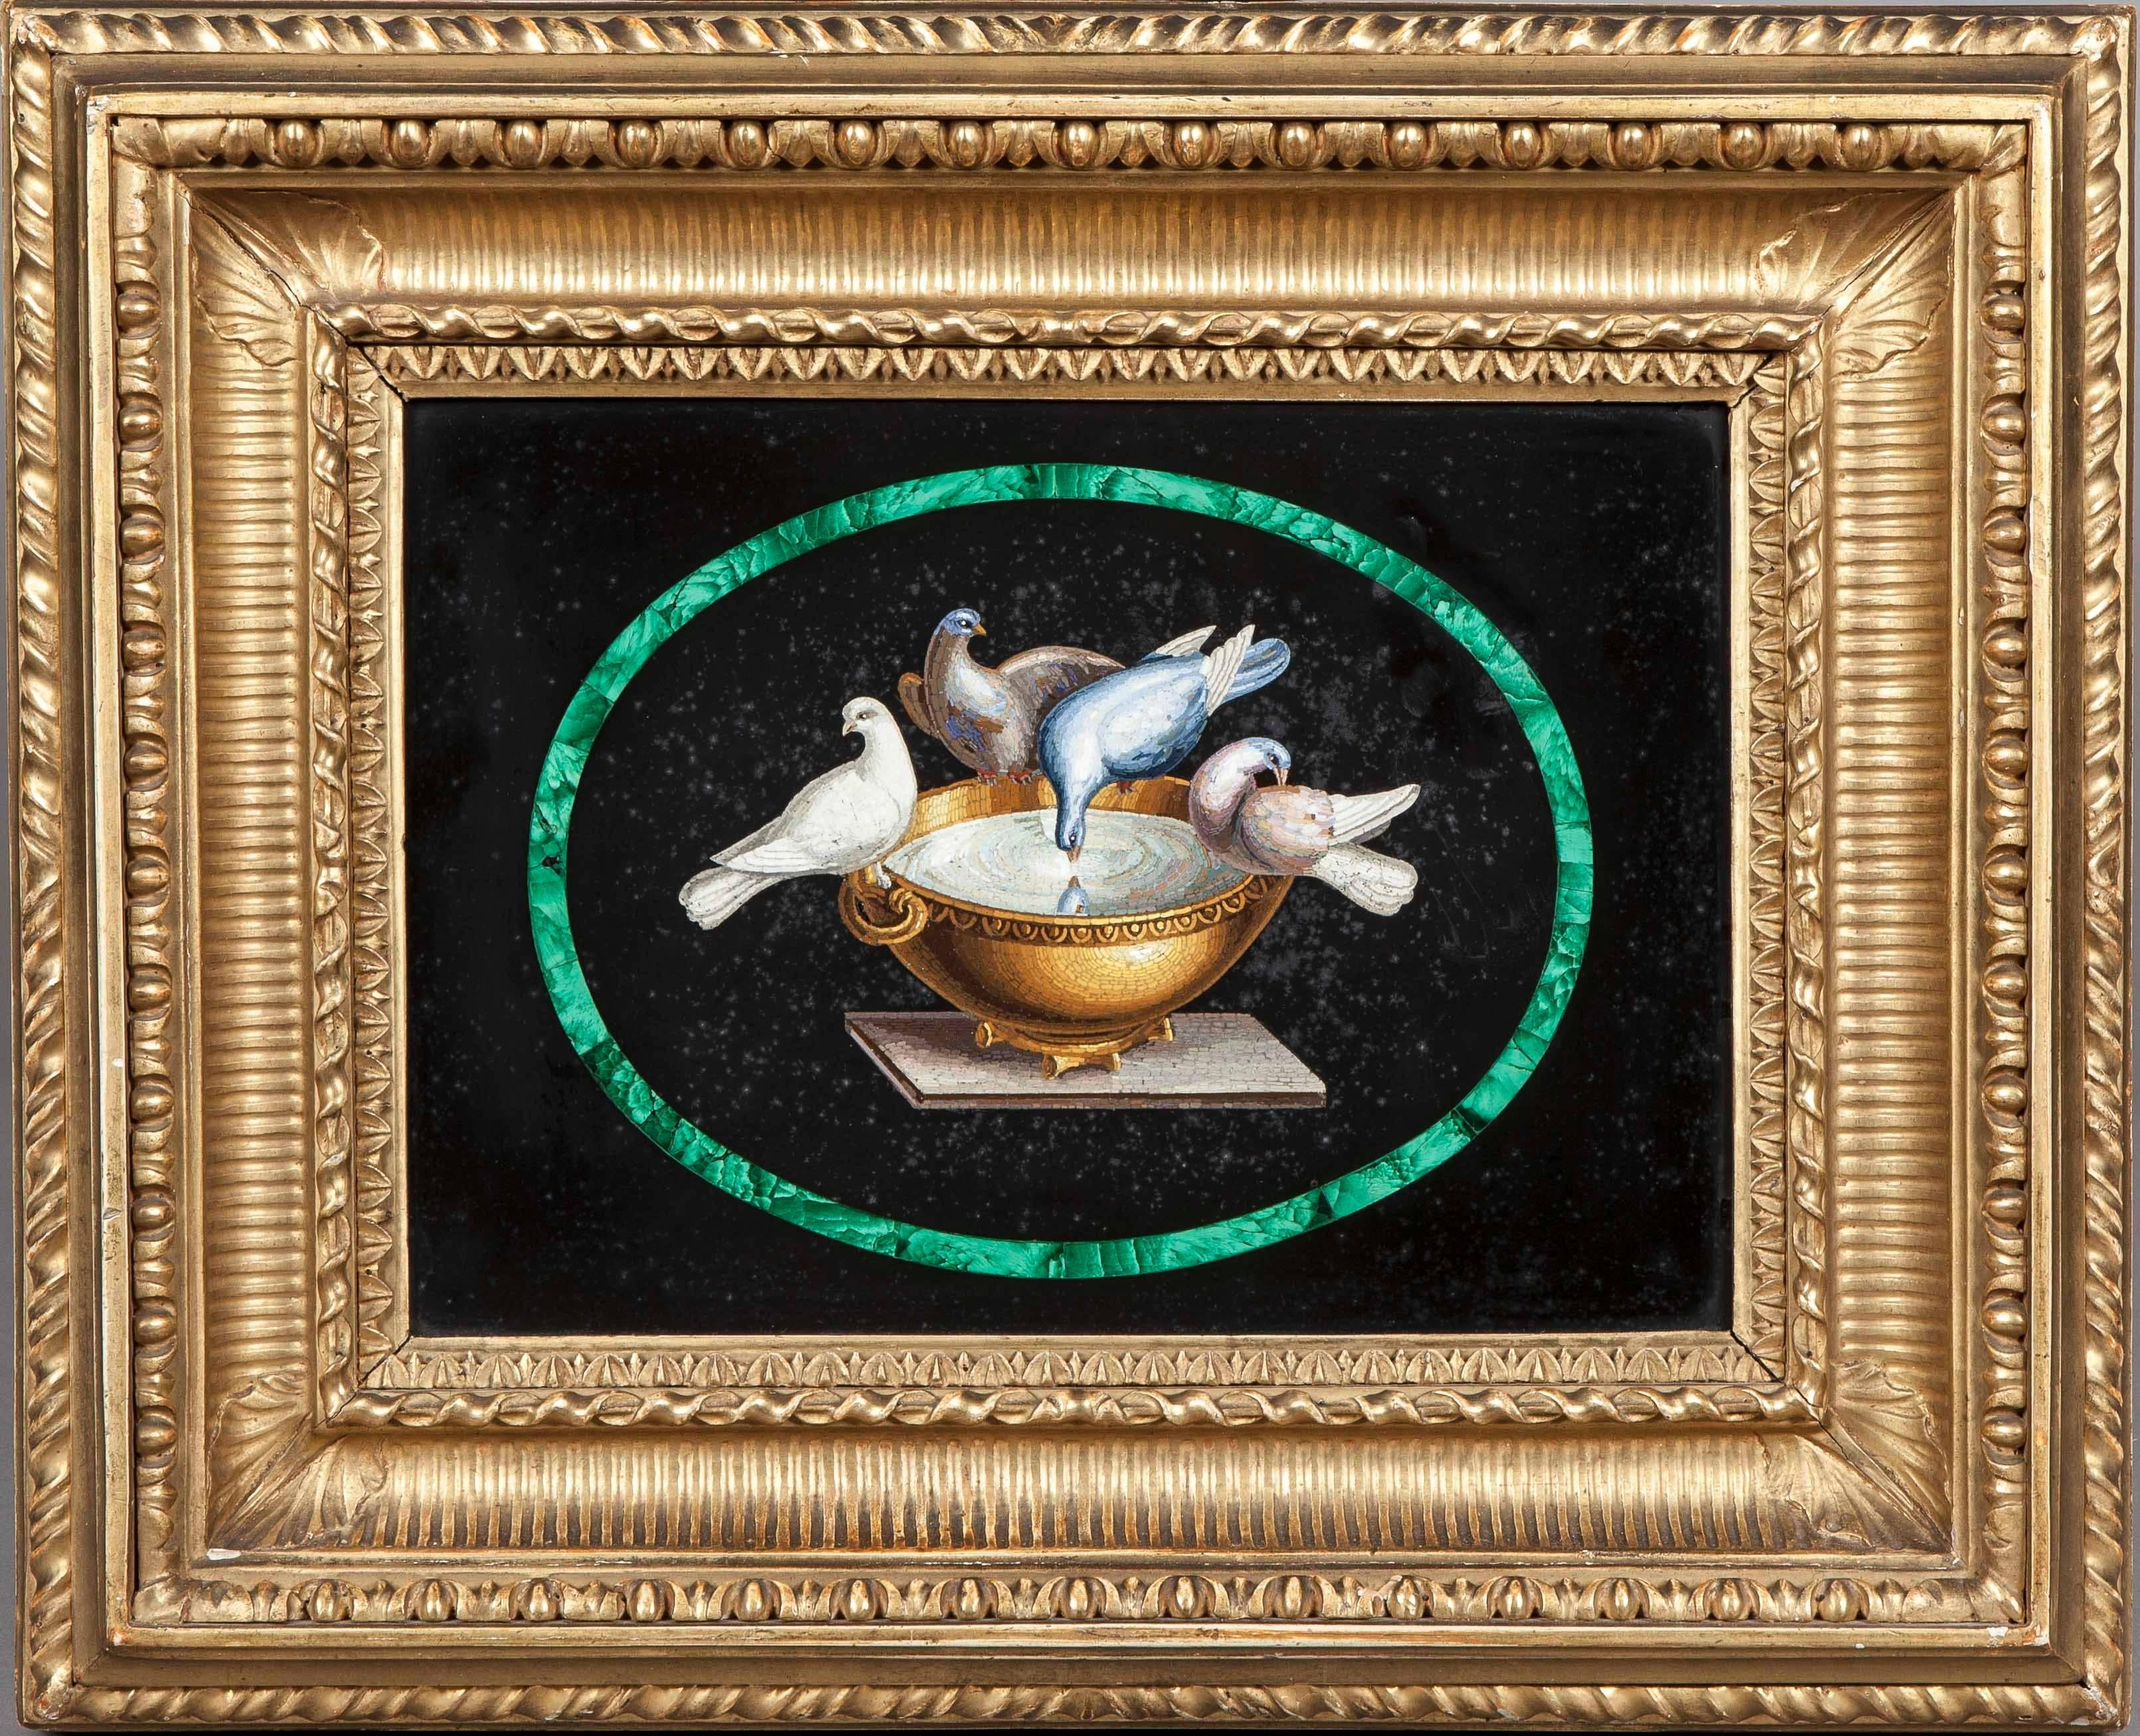 
Of rectangular form, housed within a conforming gilt frame; depicting the ‘Doves of Pliny’ within an elliptical malachite reserve.
Italian, Circa 1860

Bears a retailers label ‘Sumasca, Via del Corso, Rome’ to the reverse.

Dimensions: H: 8